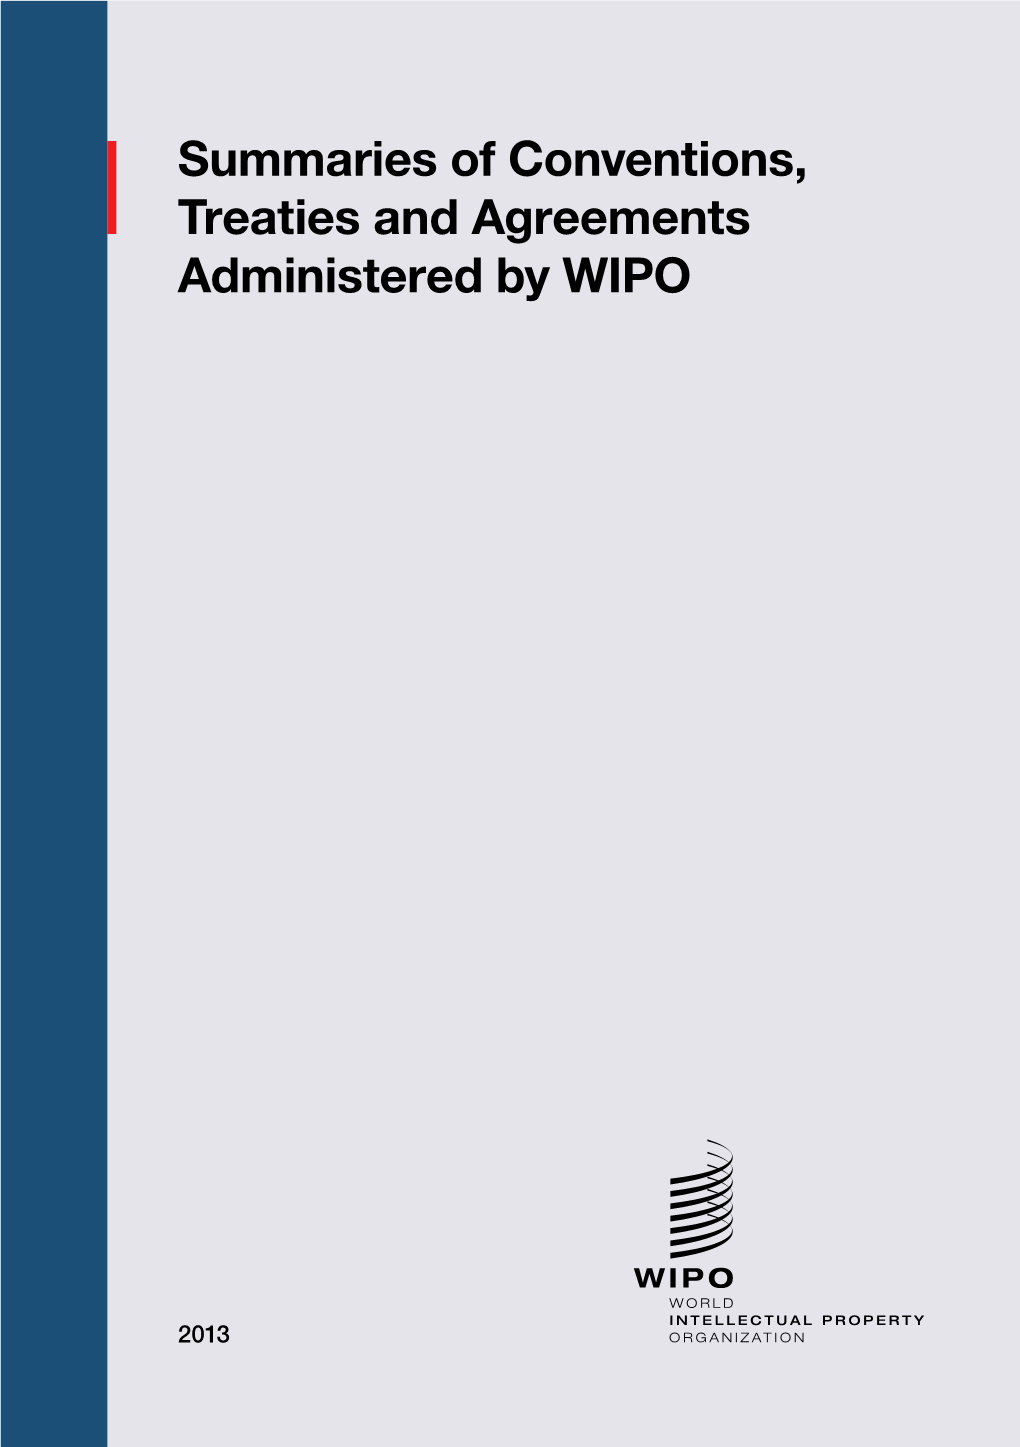 Summaries of Conventions, Treaties and Agreements Administered by WIPO